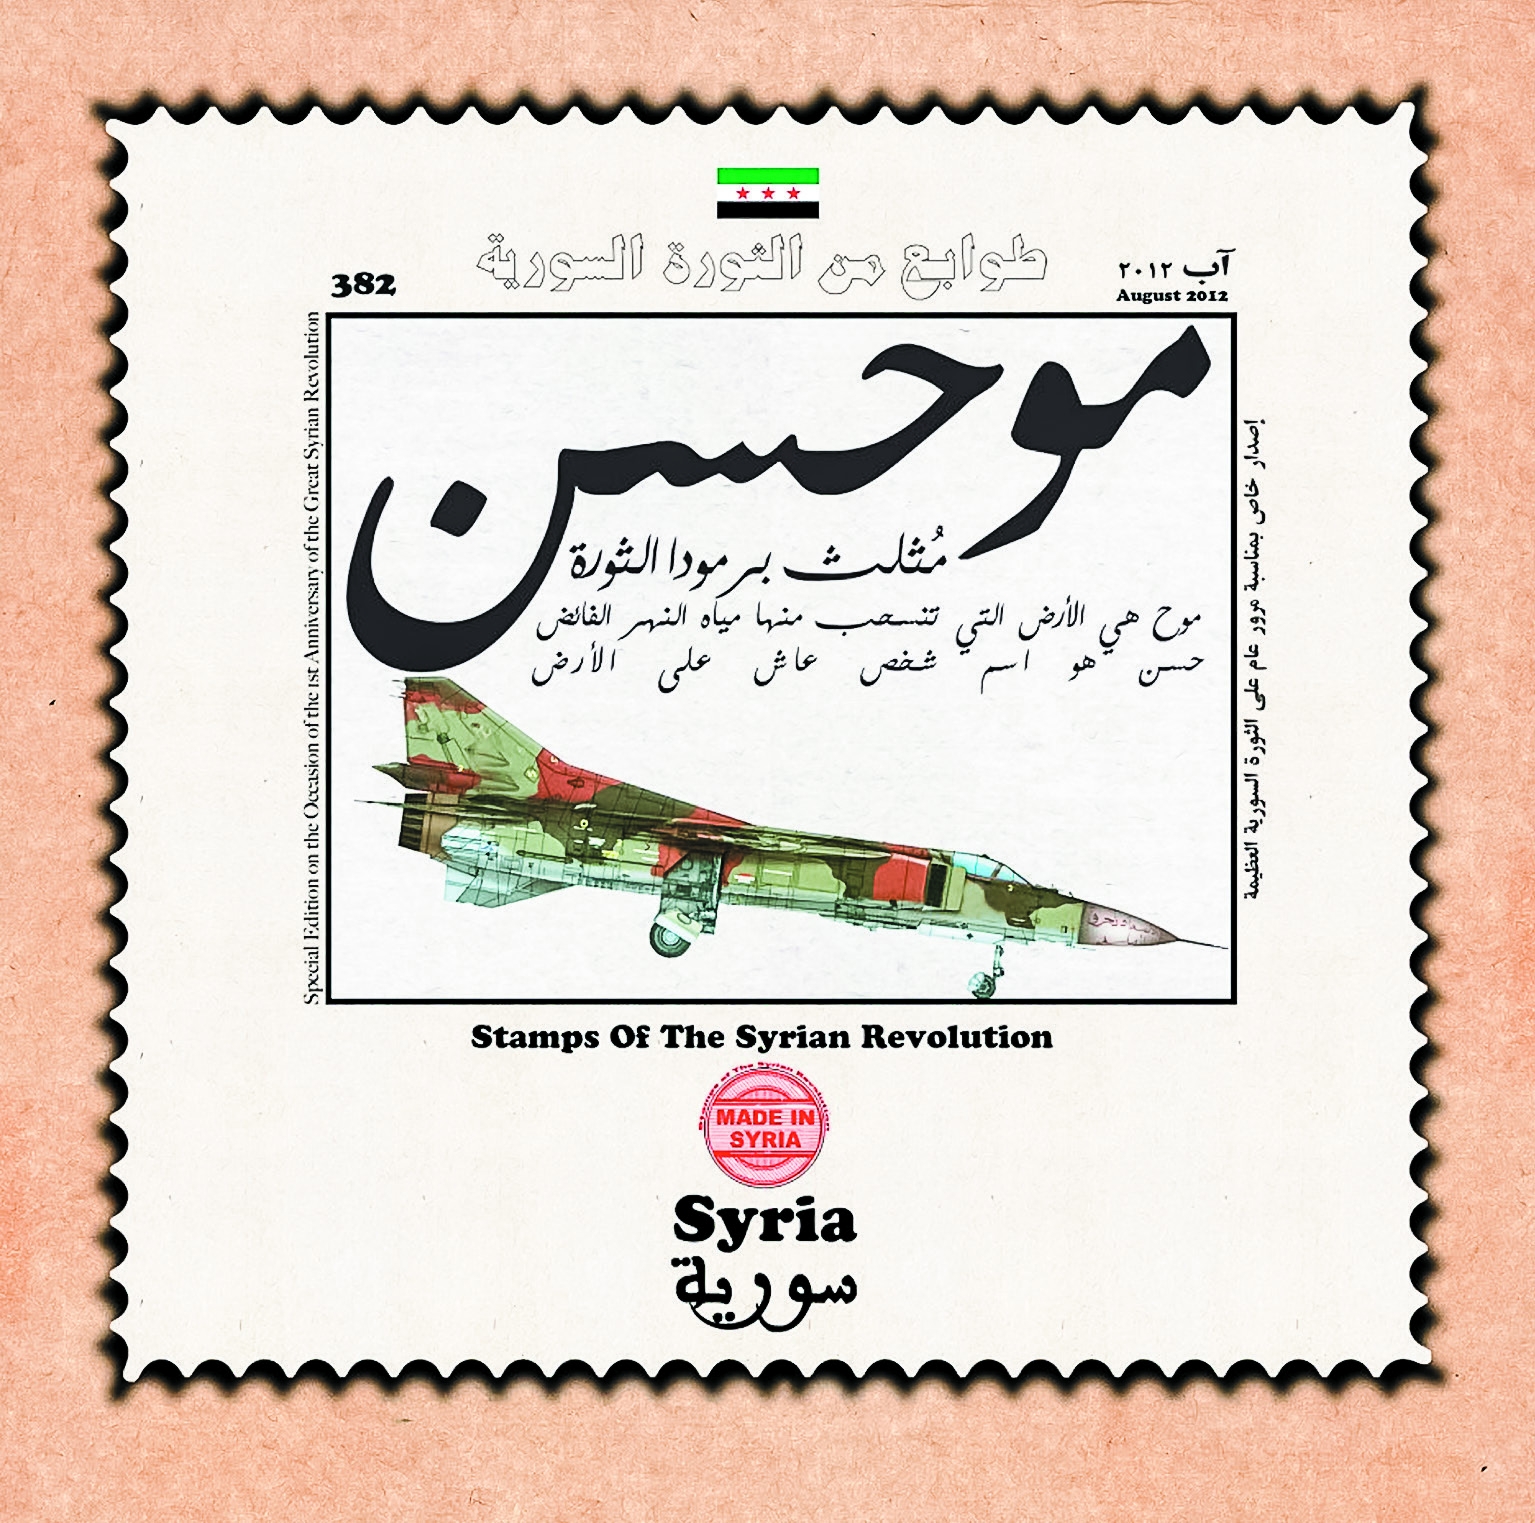 Stamp Of The Syrian Revolution by Ammar al-Beik from 2012 - in December of that year, the Free Syrian Army took al-Muhasan, which was subsequently captured by IS and targeted by air strikes